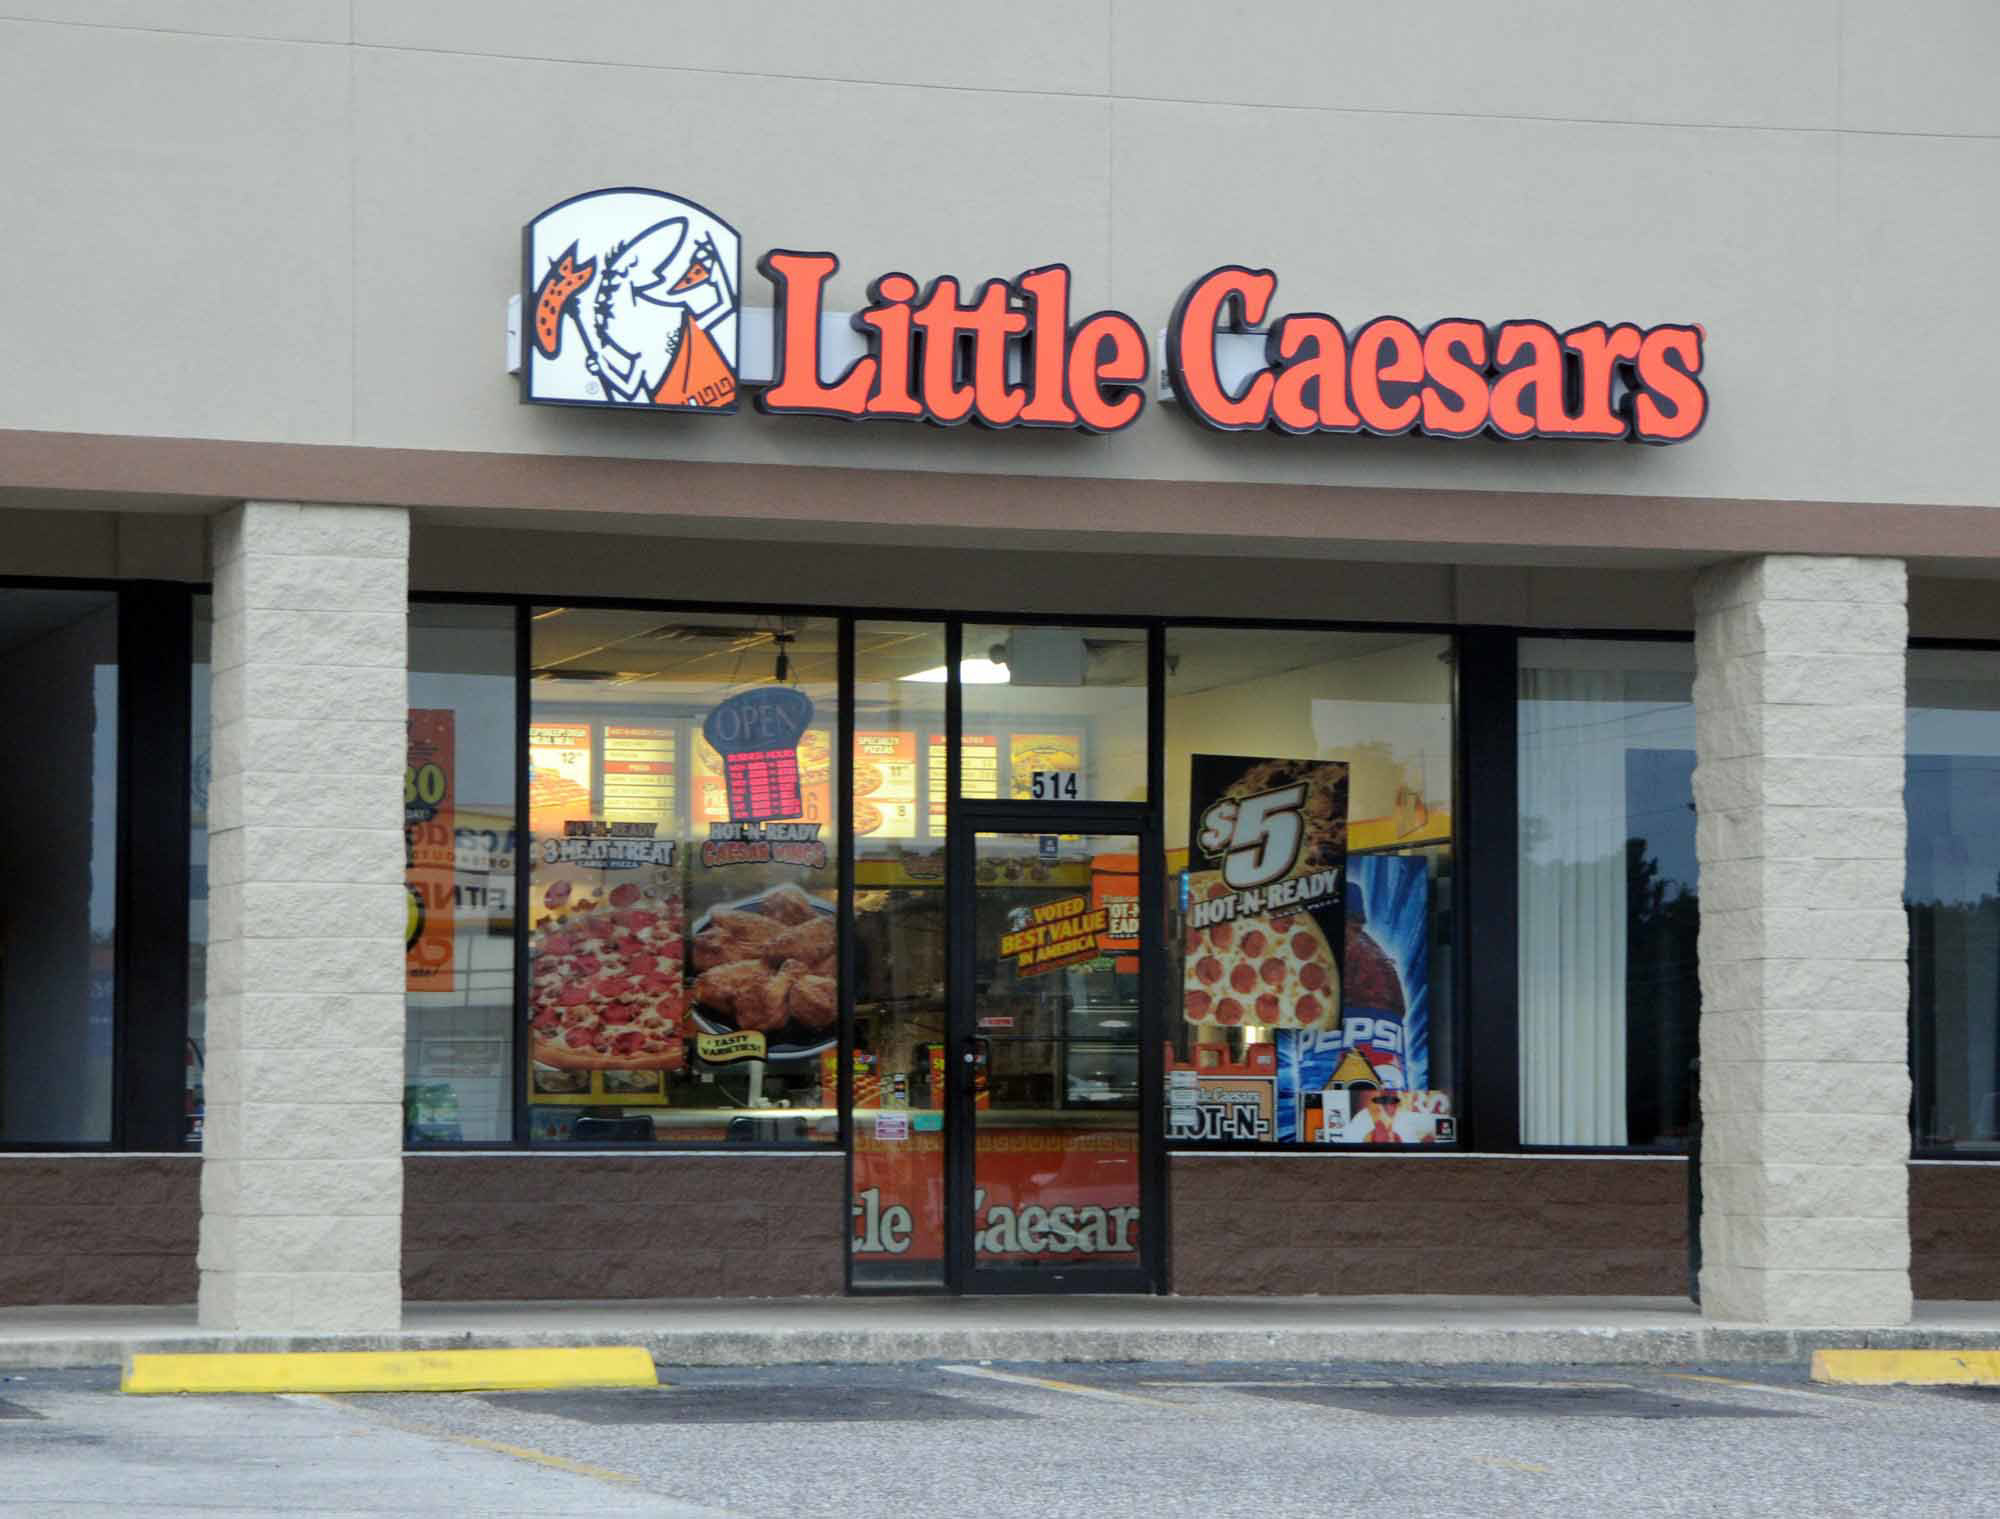 Free Little Caesars SlicesNStix? How you could win free pizza during